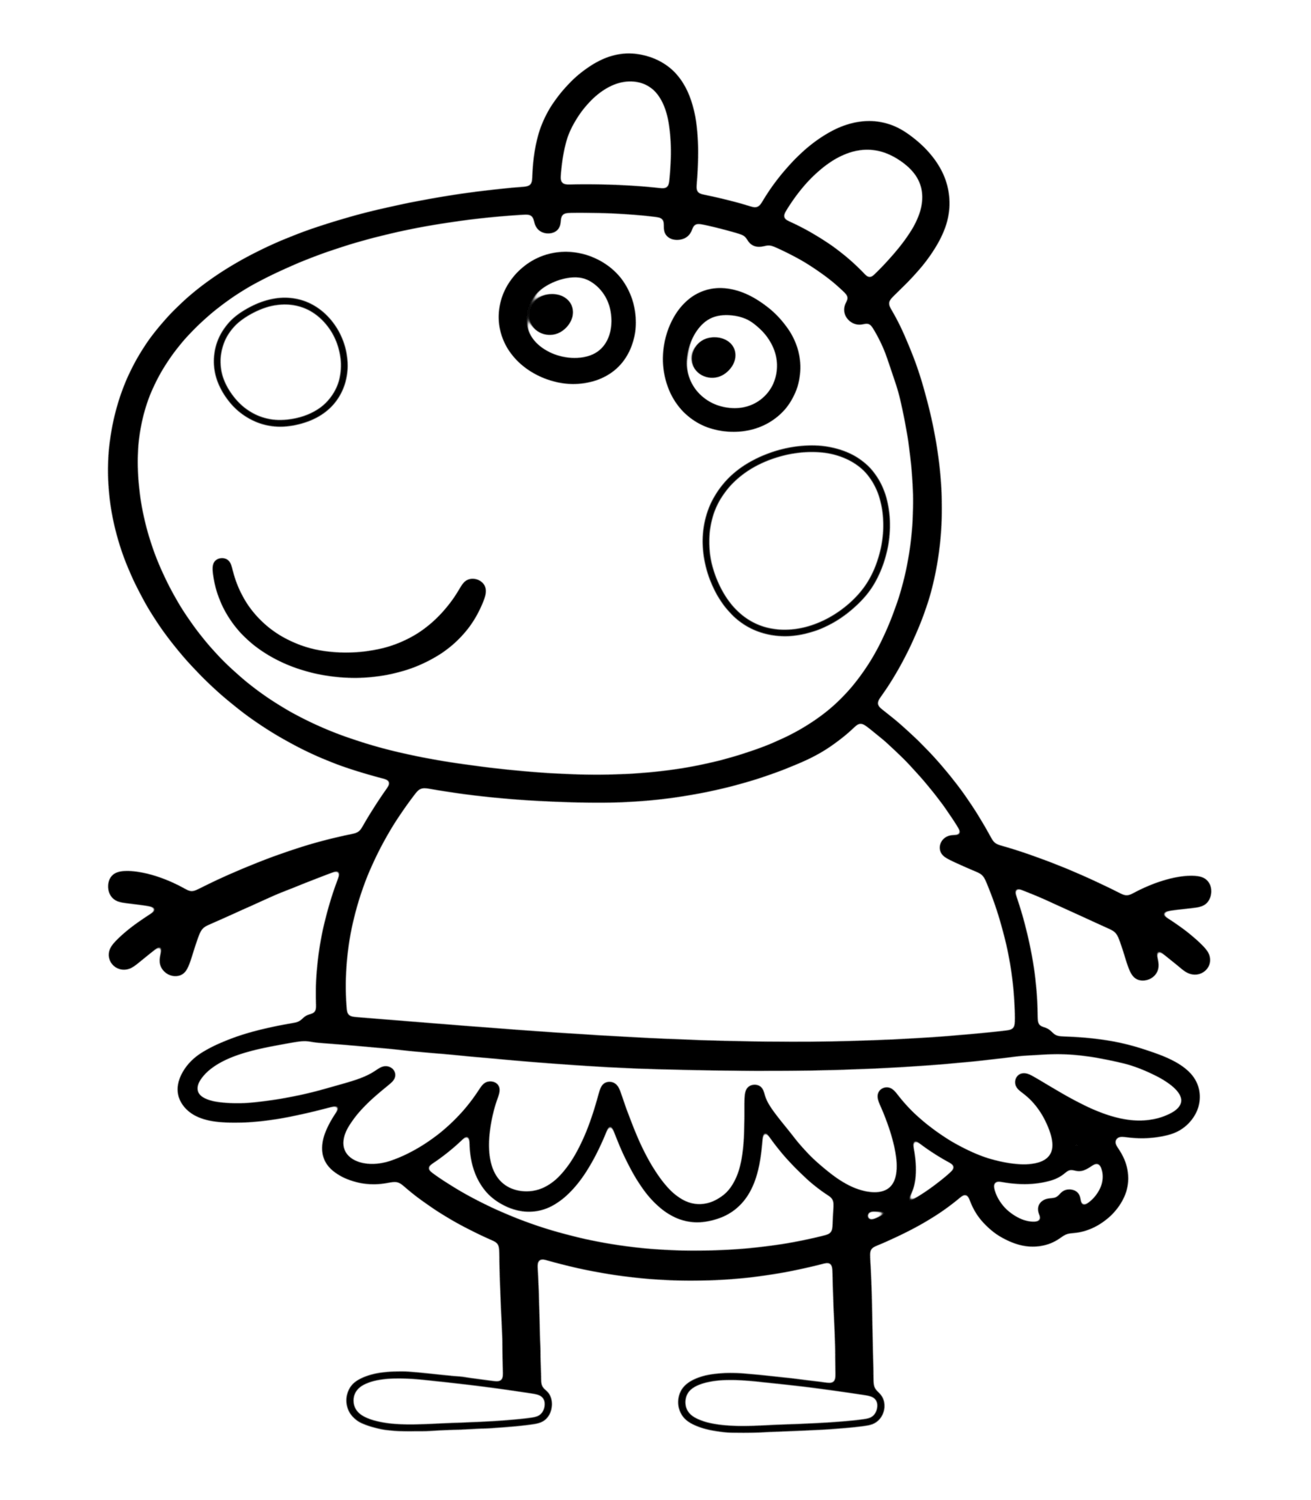 Suzy Sheep In Peppa Pig Coloring Page